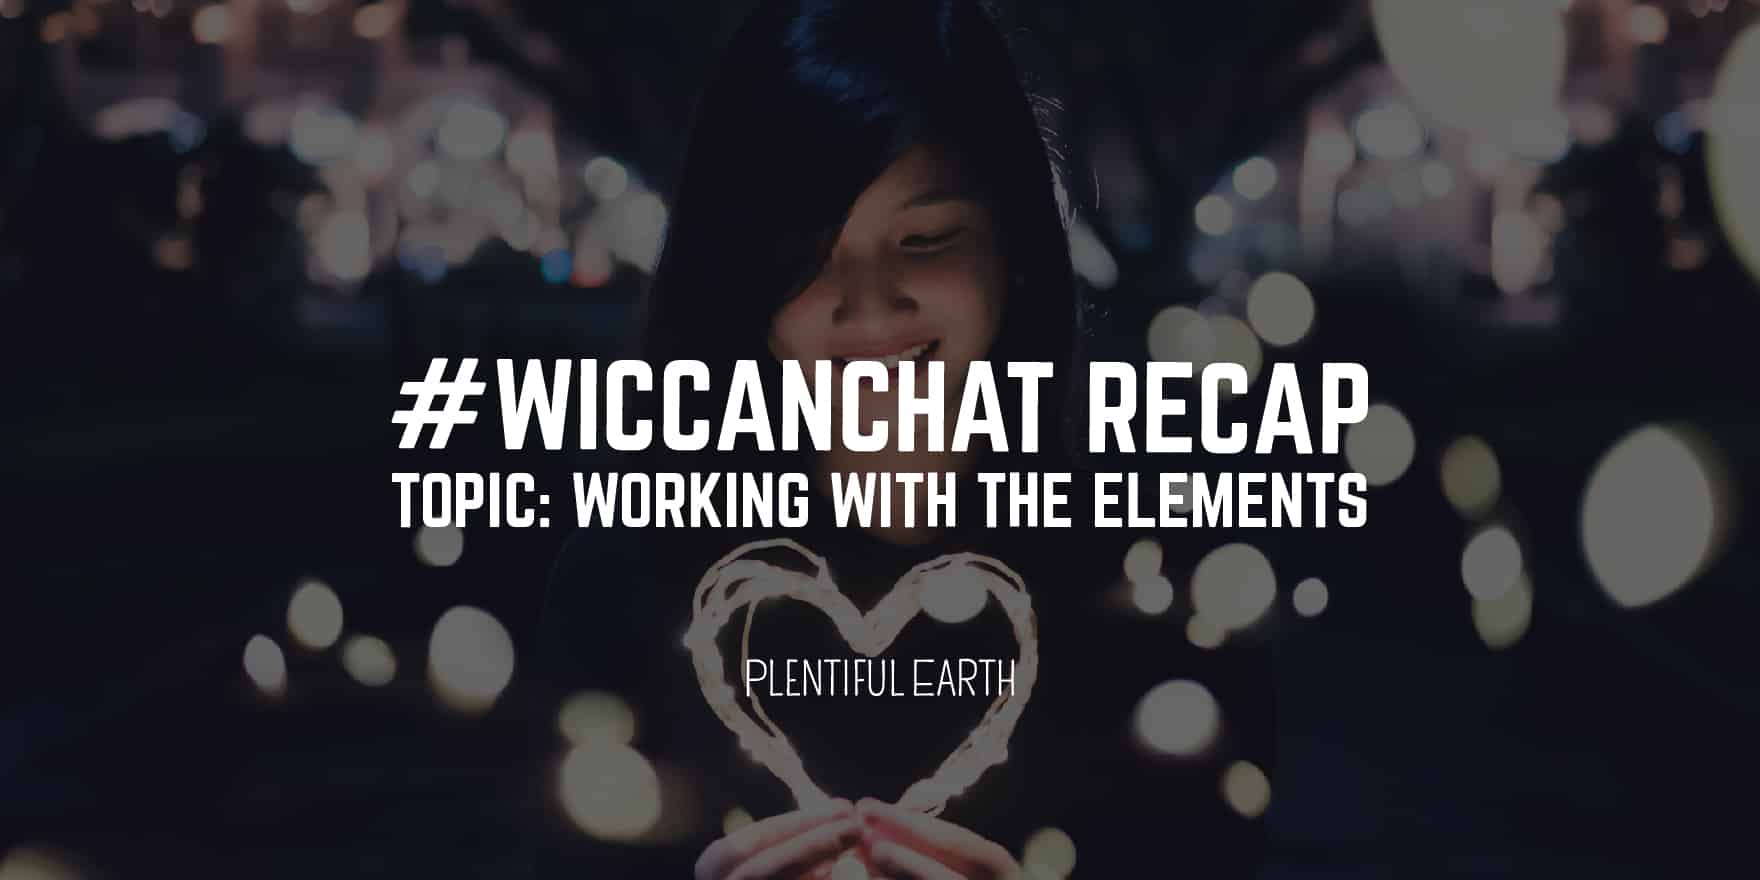 A person forms a heart shape with their hands, highlighted against a softly blurred background of twinkling lights, accompanied by the text "#wiccanchat recap: topic: working with the elements – plentiful